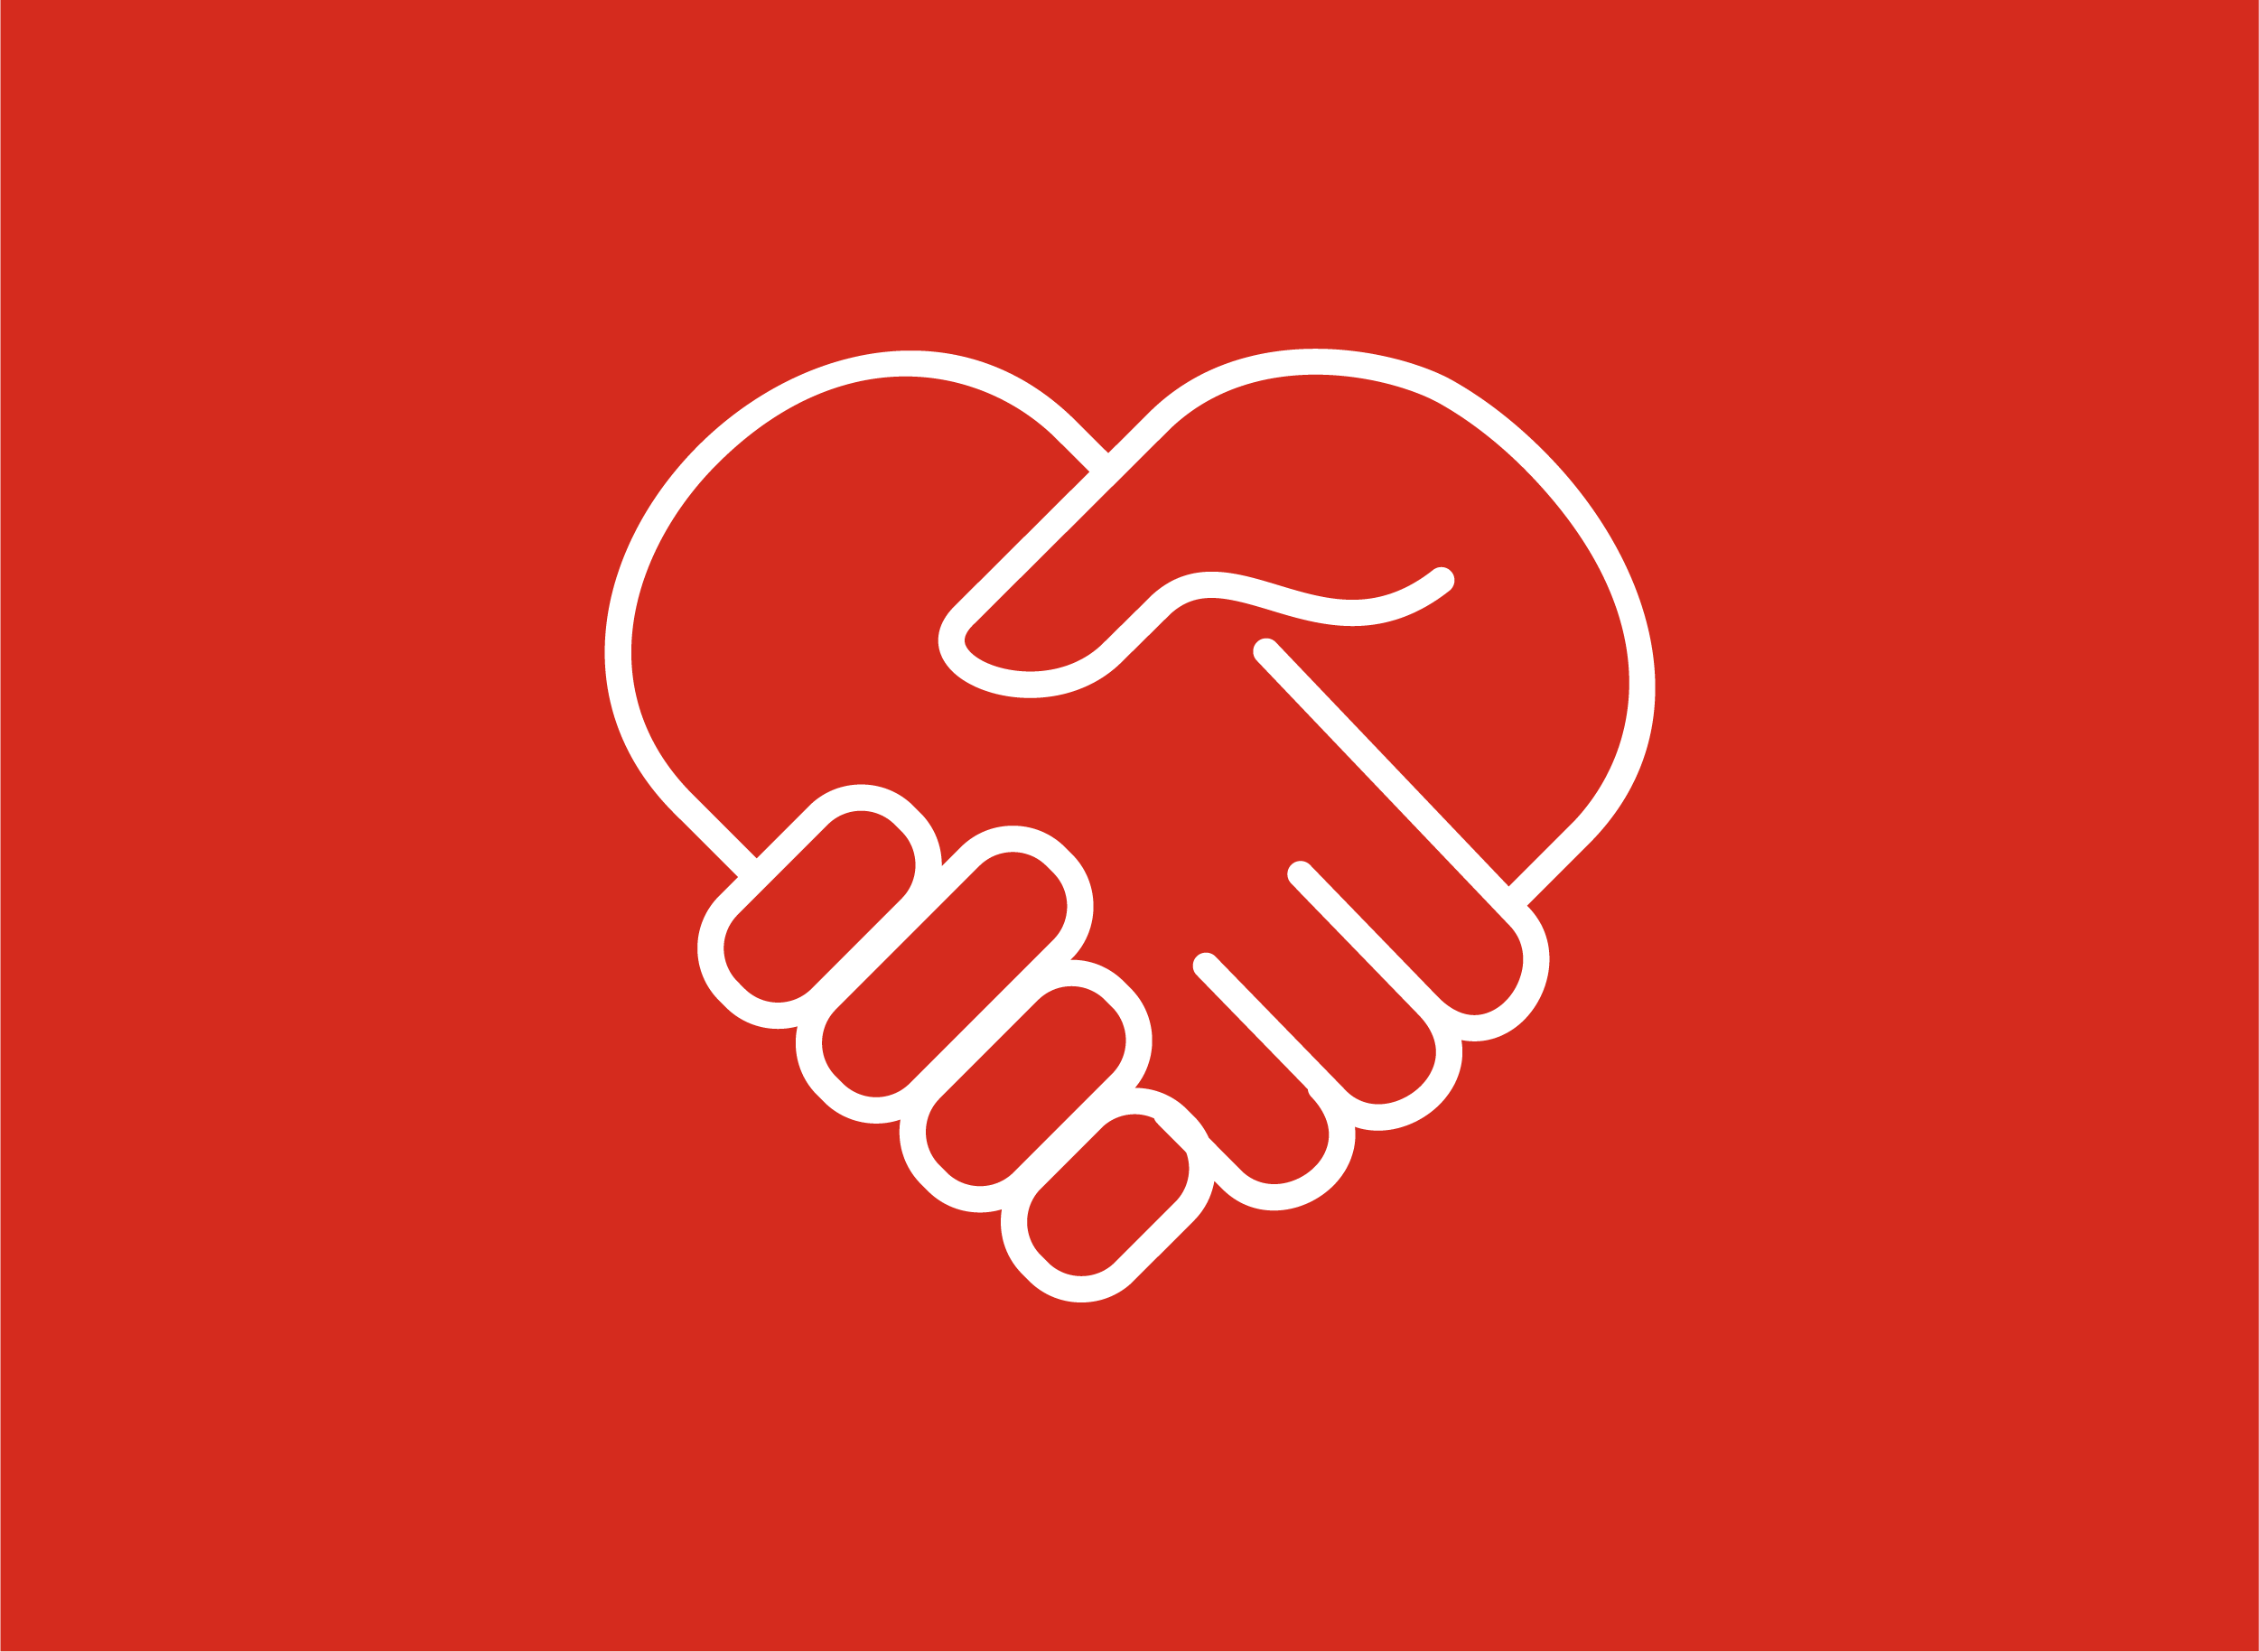 Red icon of a handshake. It is shaped like a heart. 